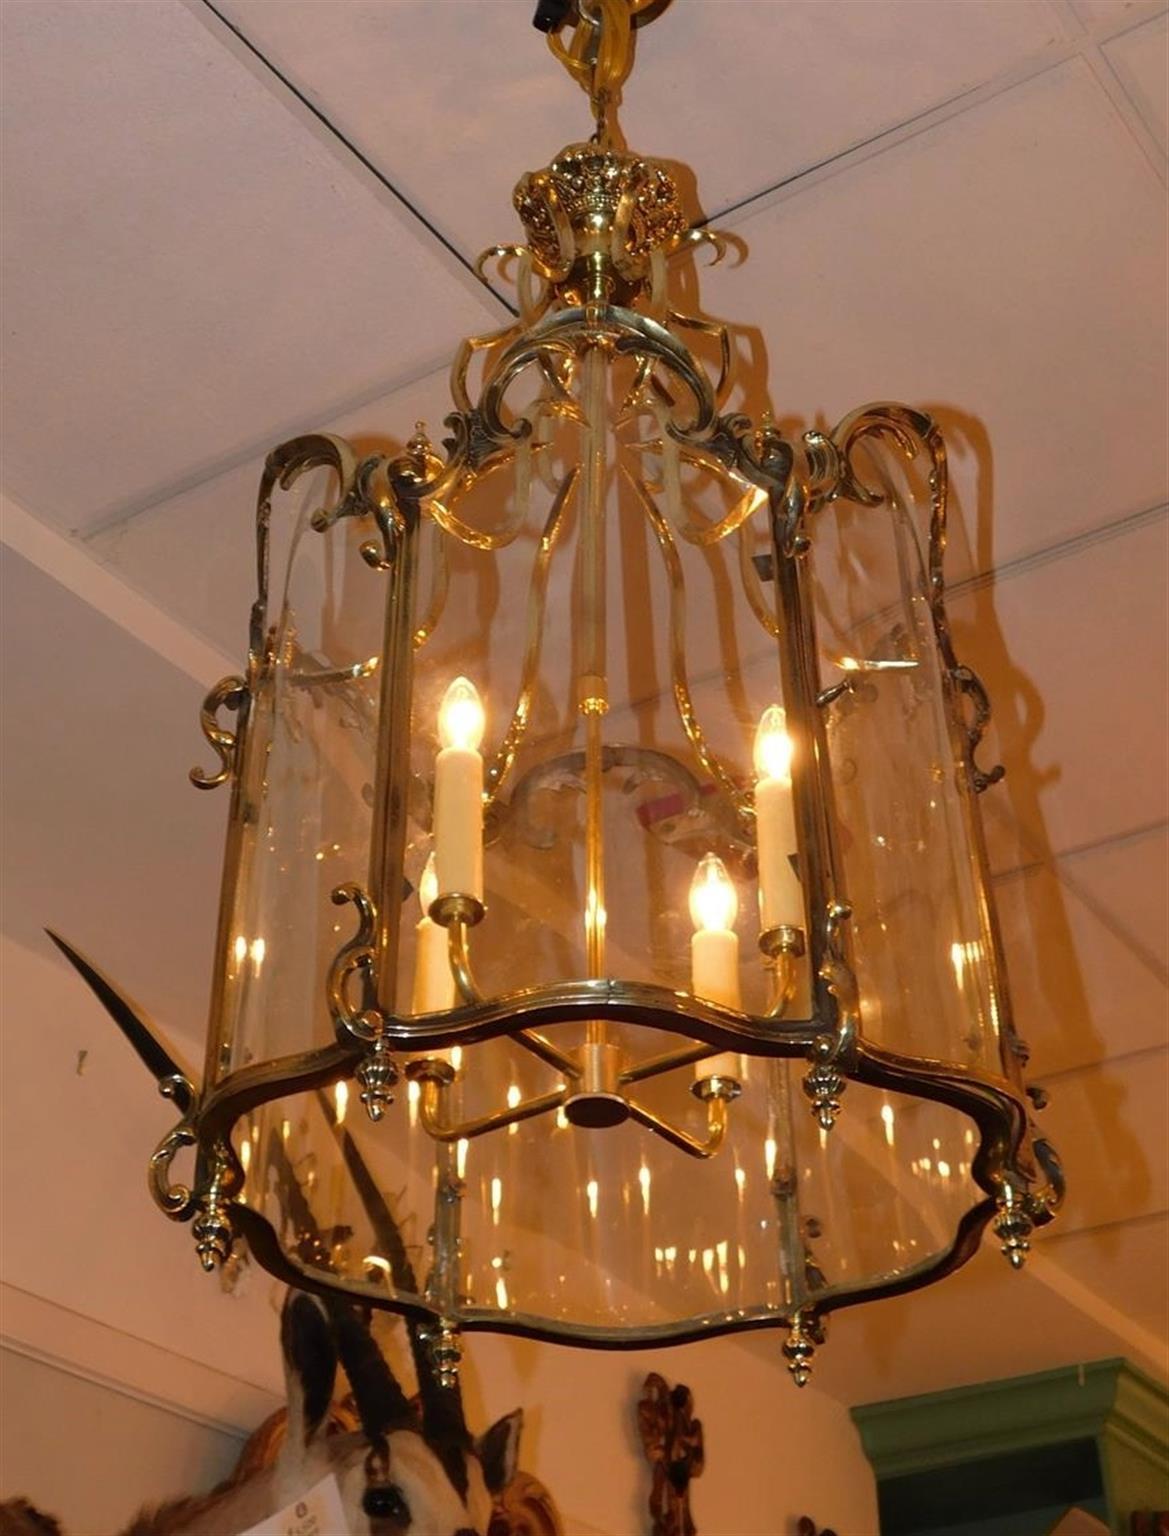 English brass serpentine foliage hanging hall / foyer lantern with a locking hinged door, flanking bulbous urn finials, scroll work, and retains the original six panel hand cut glass. Lantern was originally candle powered and has been electrified